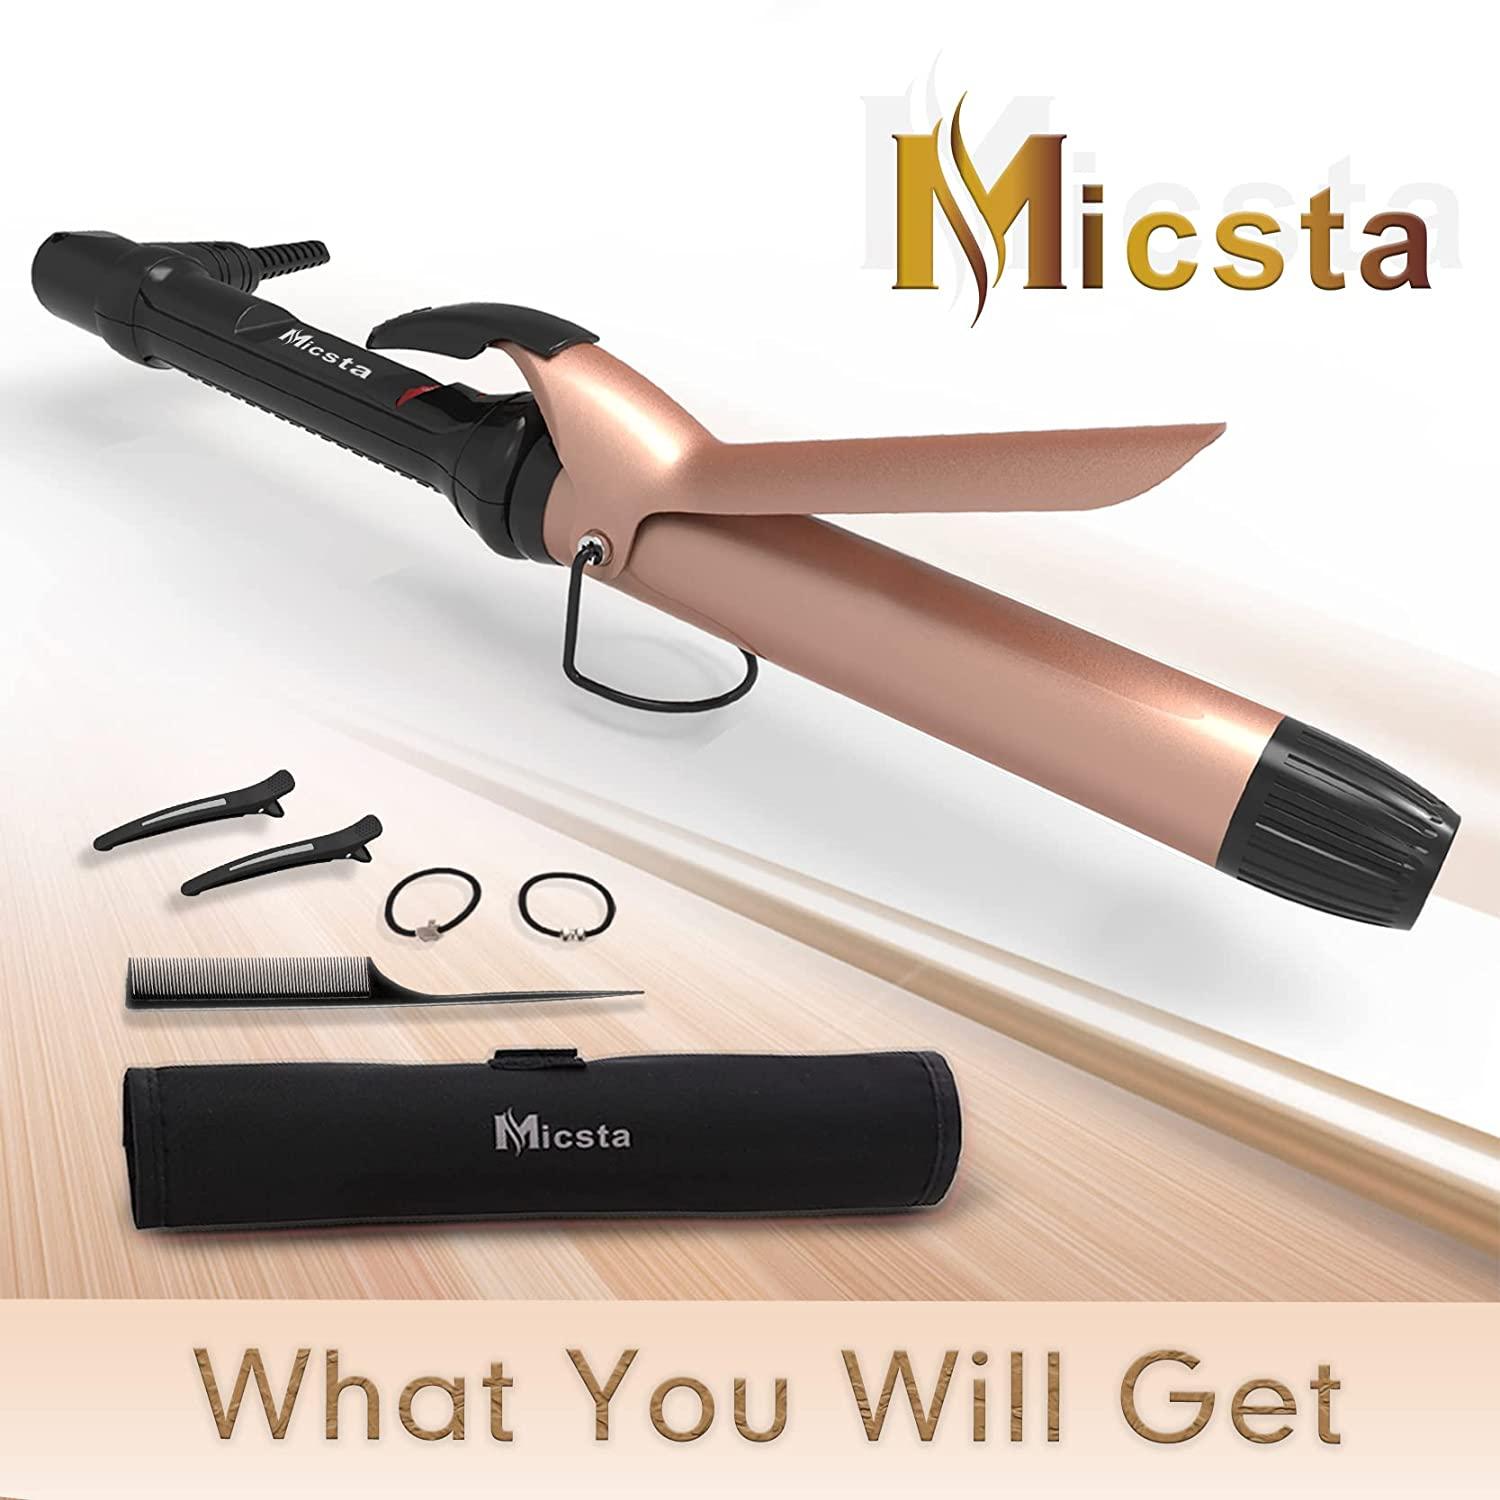 MICSTA 1 1/4 inch Curling Iron, 32mm Large Curling Wand Extra Long berral,  ” Thick Hair Wand Big Curling Iron, Wide Curler Wand for Long Hair,  Temperature Control with Dual Voltage for